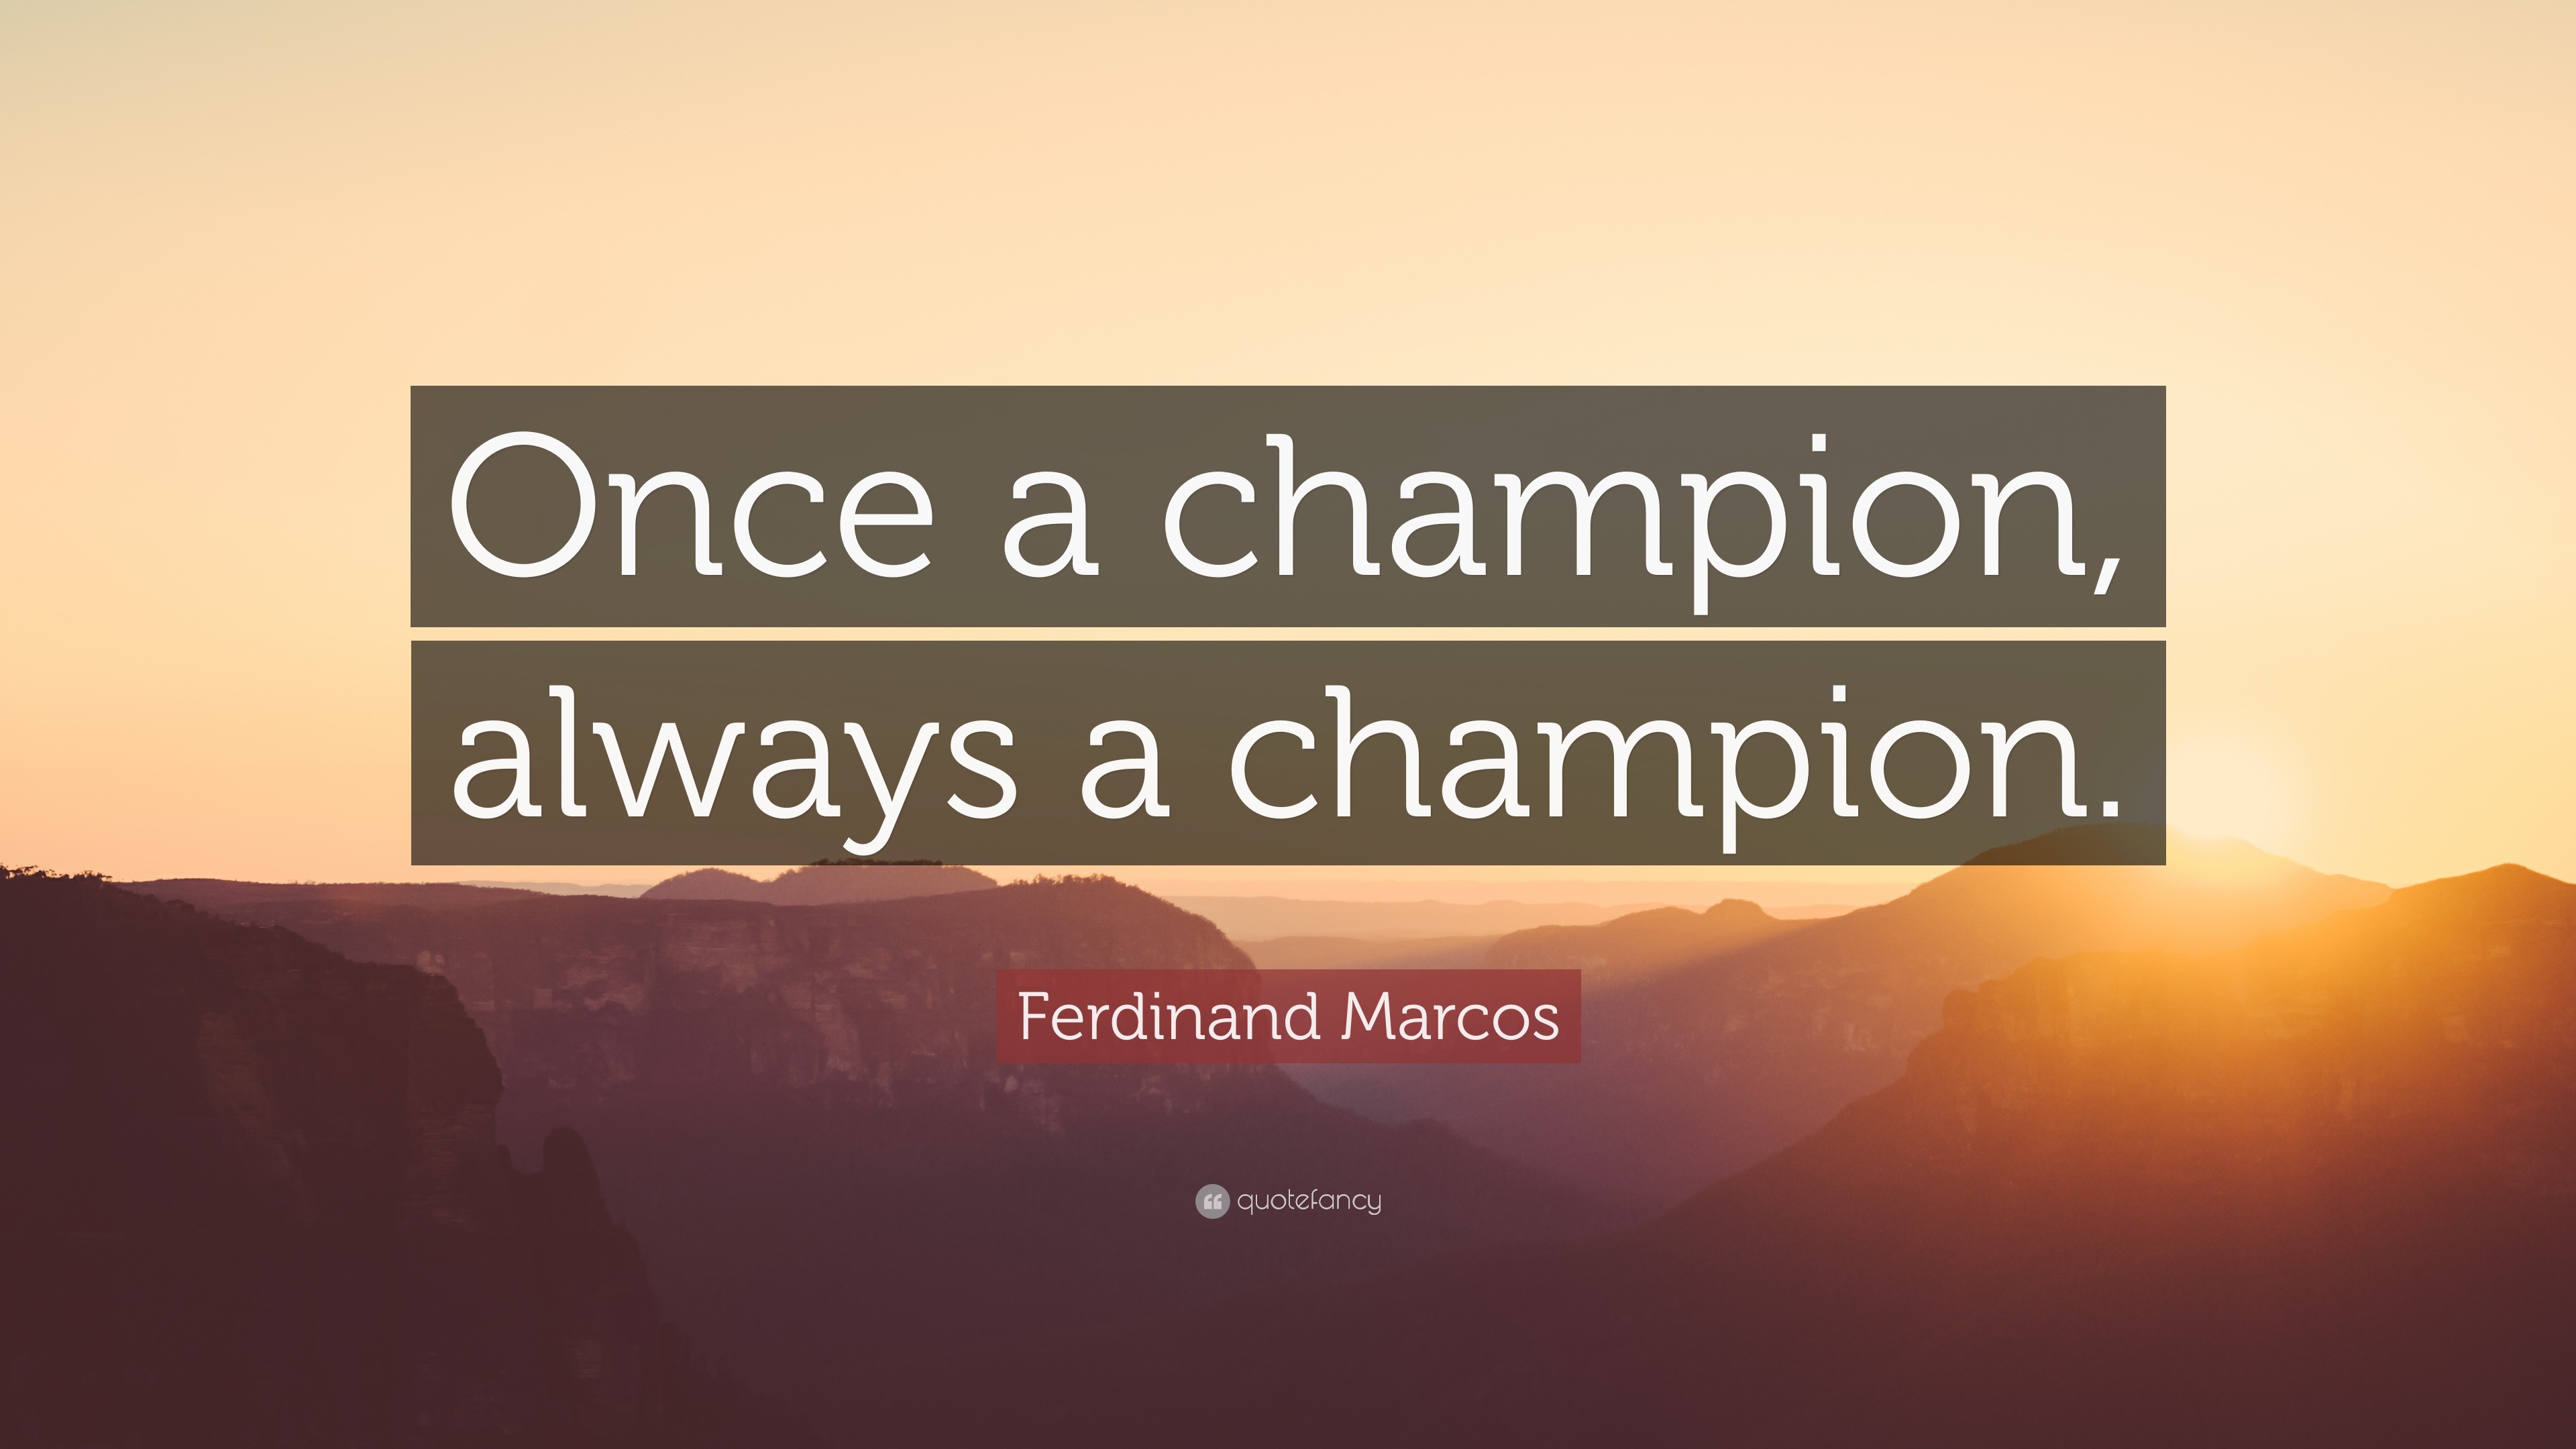 Ferdinand Marcos Quote: “Once a a champion.”